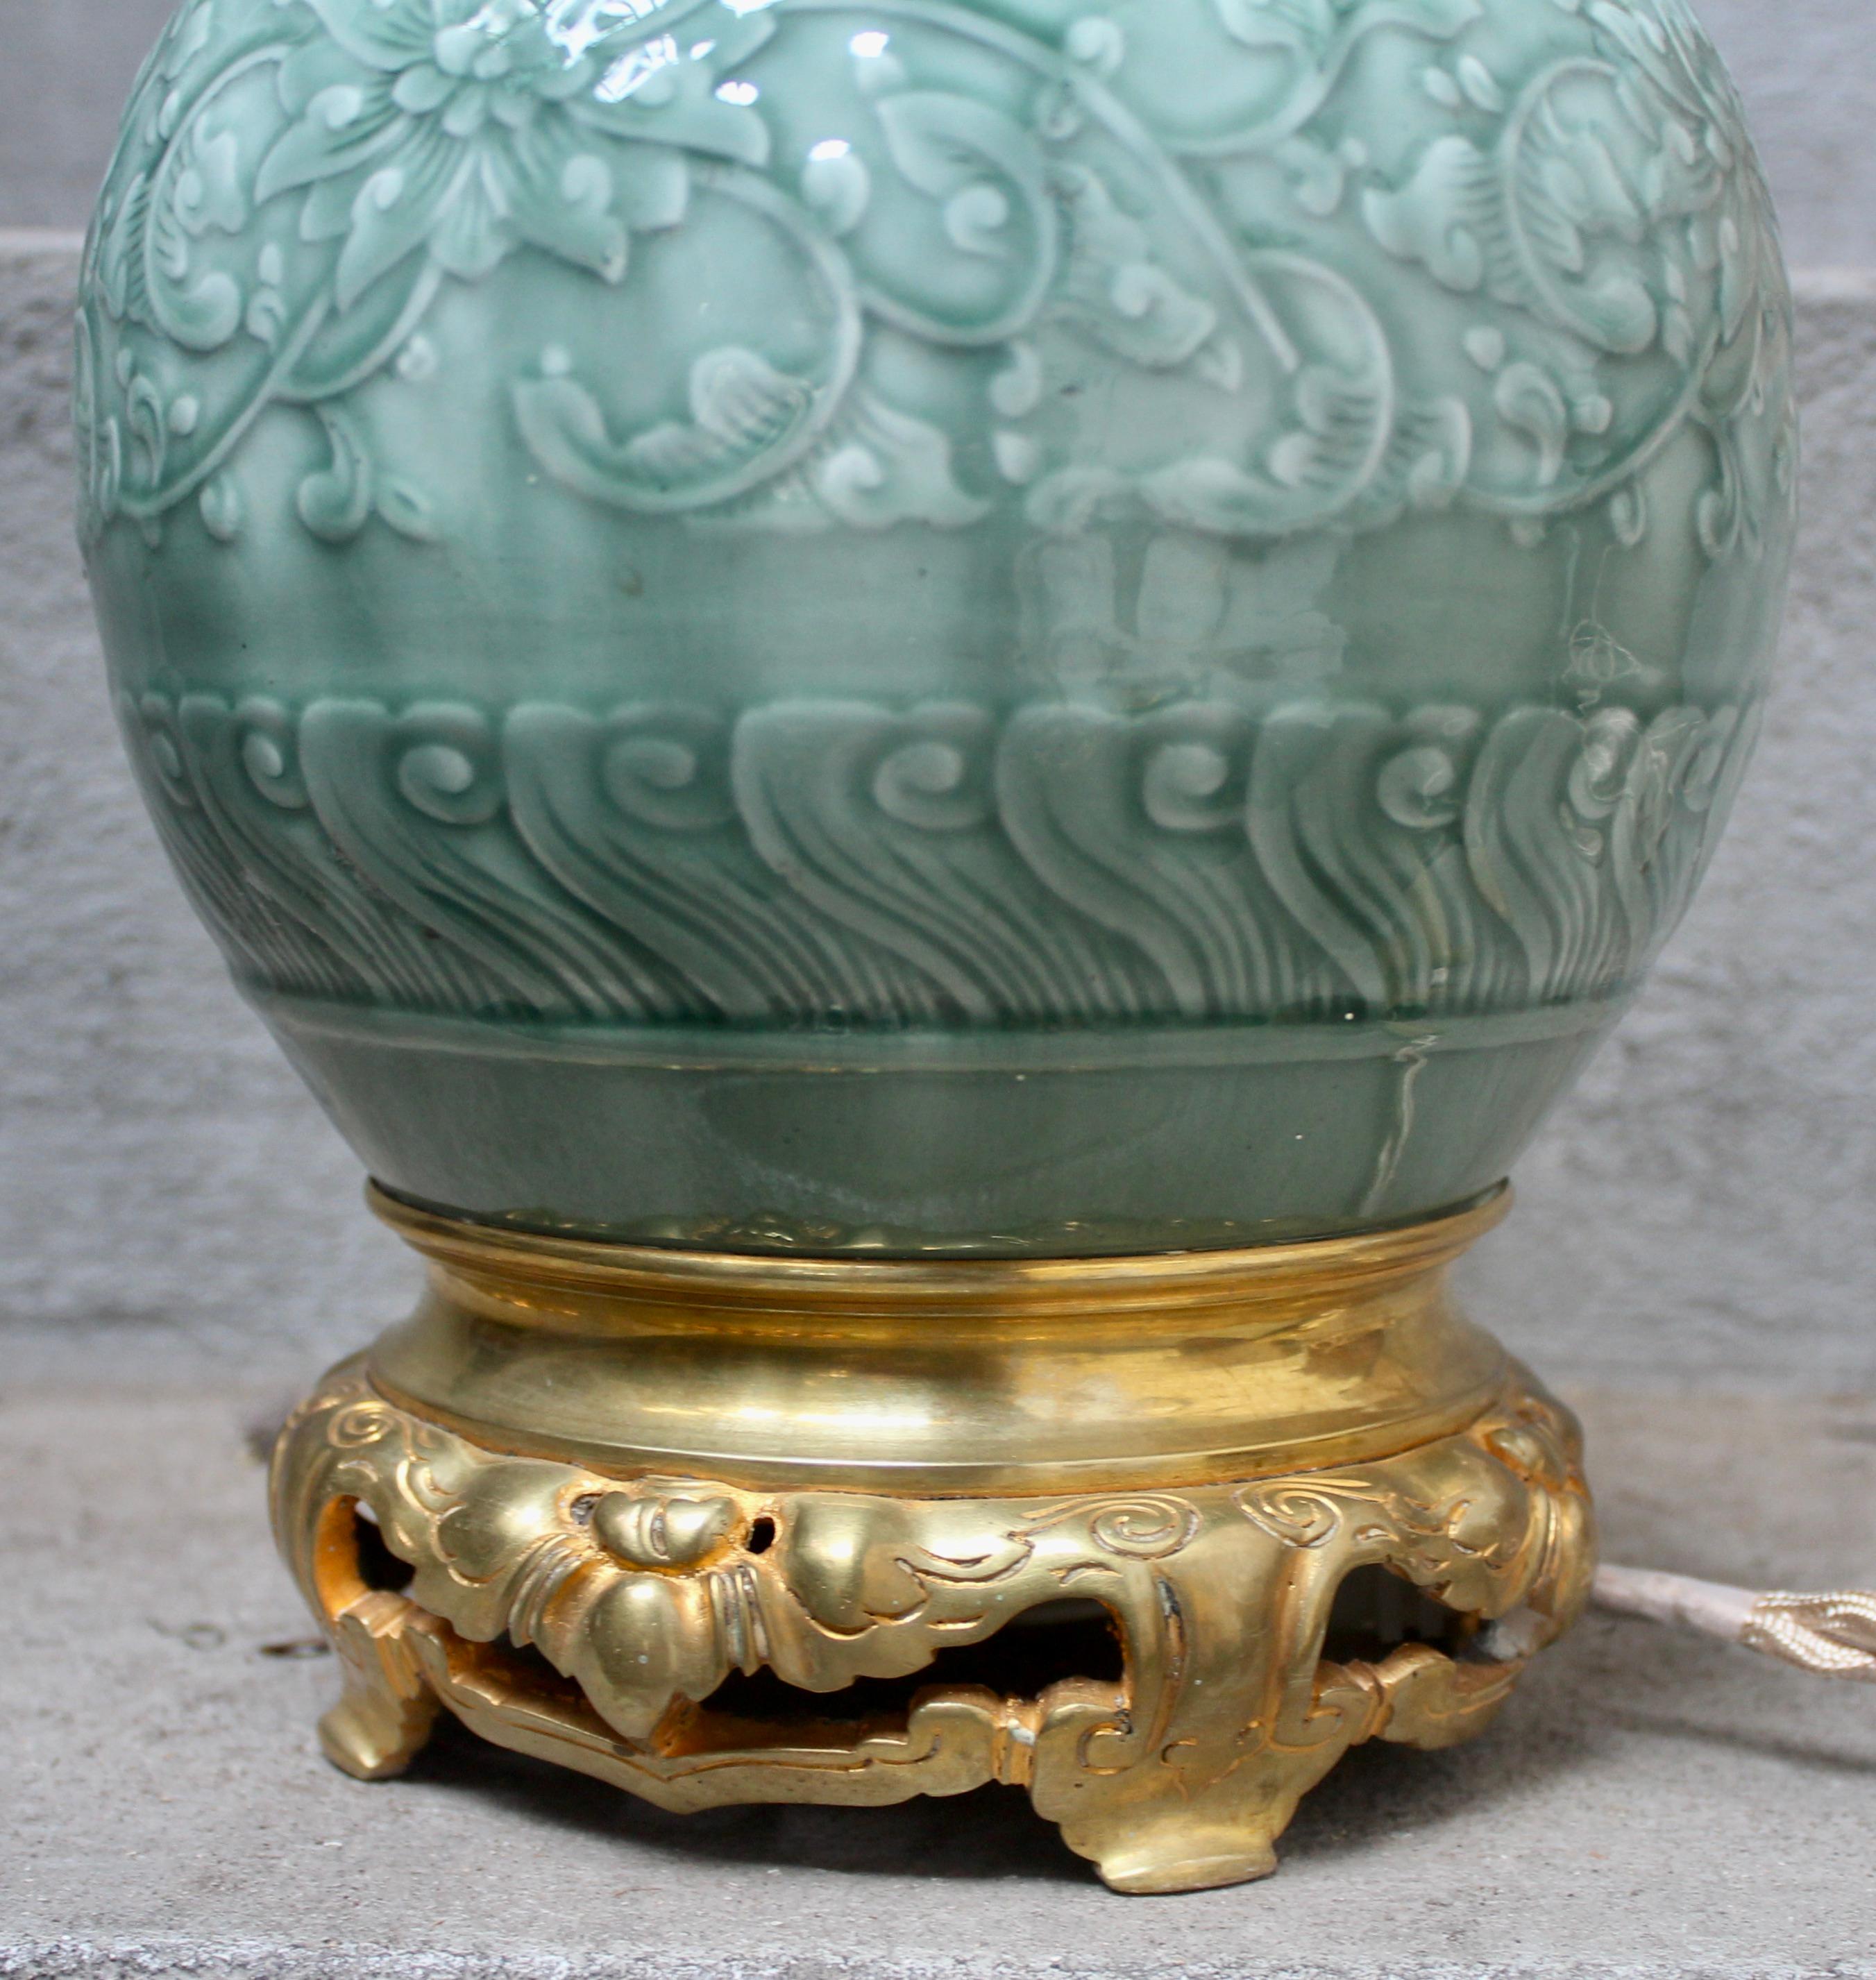 Late 19th Century Theodore Deck Faience Enameled Vase Ormolu-Mounted in Lamp, circa 1880